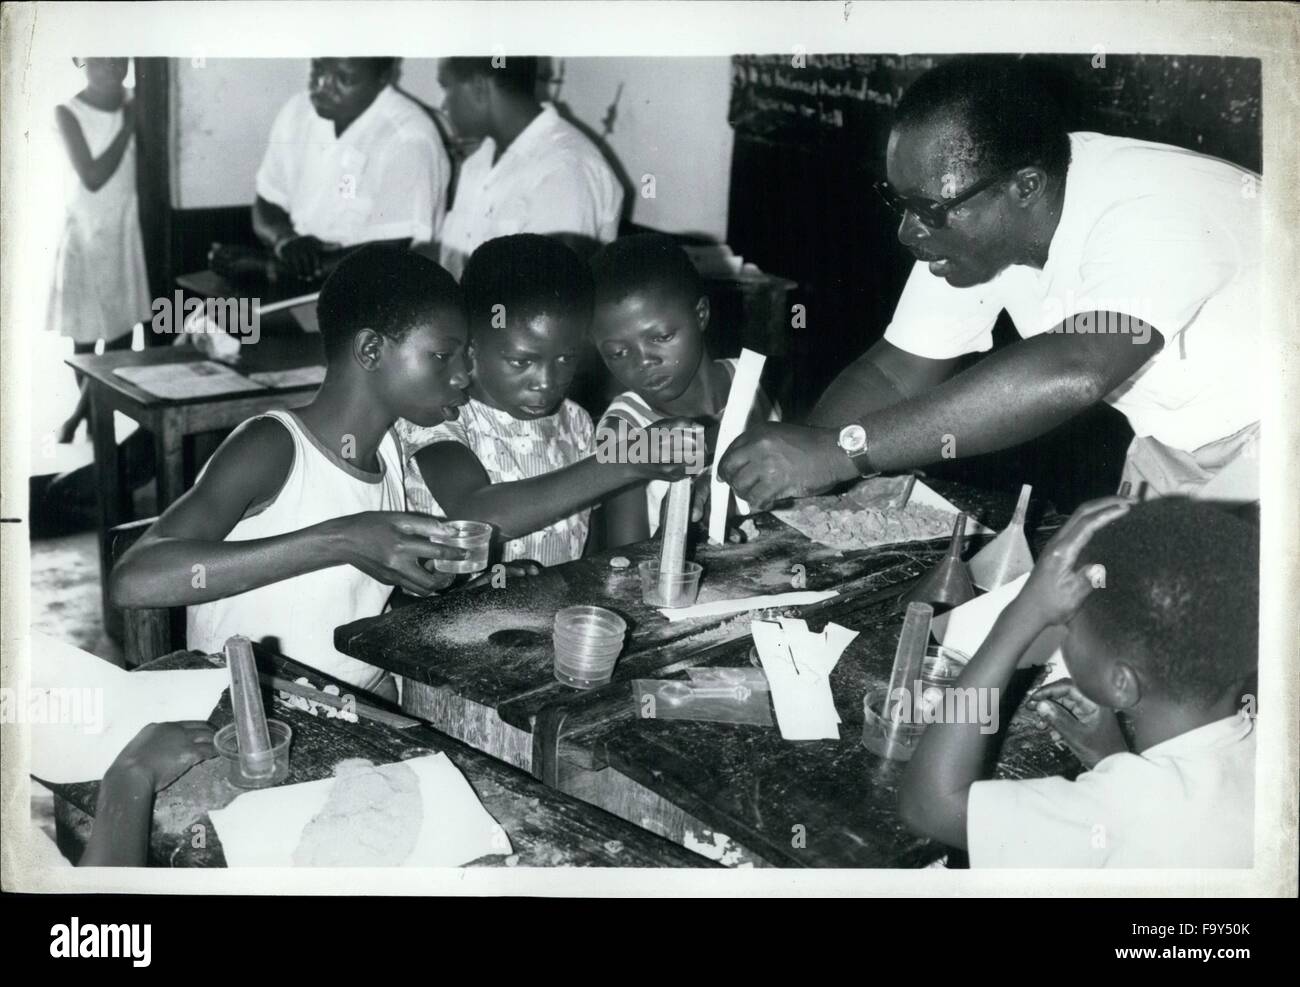 1968 - Malawi: African students learn principles of science through a program sponsored by the Education Development Center of Newton, Massachusetts. EDC has helped to set up primary level centers like the one shown here in other African countries as well. © Keystone Pictures USA/ZUMAPRESS.com/Alamy Live News Stock Photo